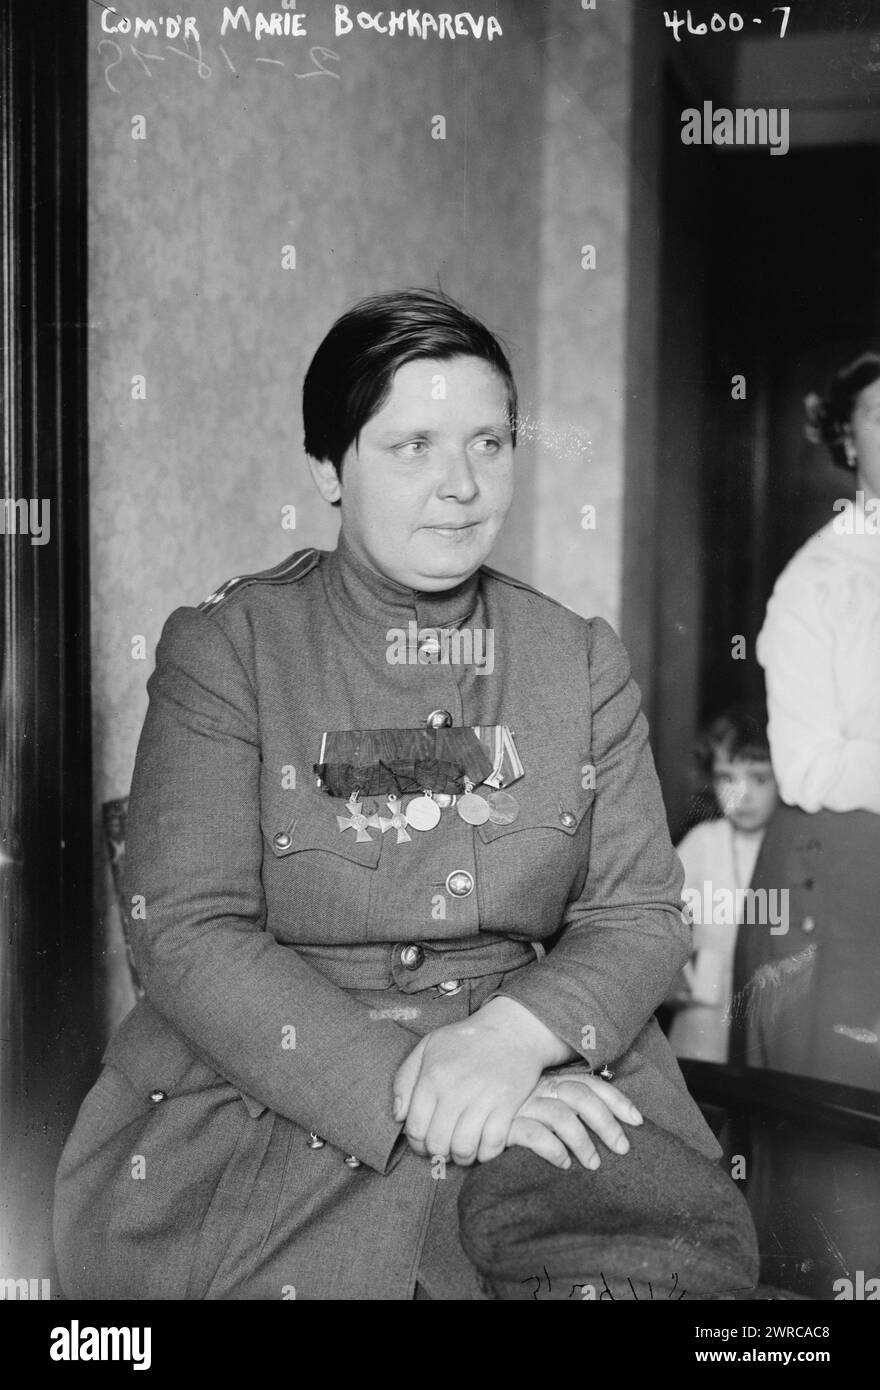 Com'd'r. Marie Bochkareva, Photograph shows Maria Leontievna Bochkareva (1889-1920) a Russian woman who served in World War I and formed the Women's Battalion of Death. In 1918 she visited the United States including New York City., 1918 Feb. 18, World War, 1914-1918, Glass negatives, 1 negative: glass Stock Photo